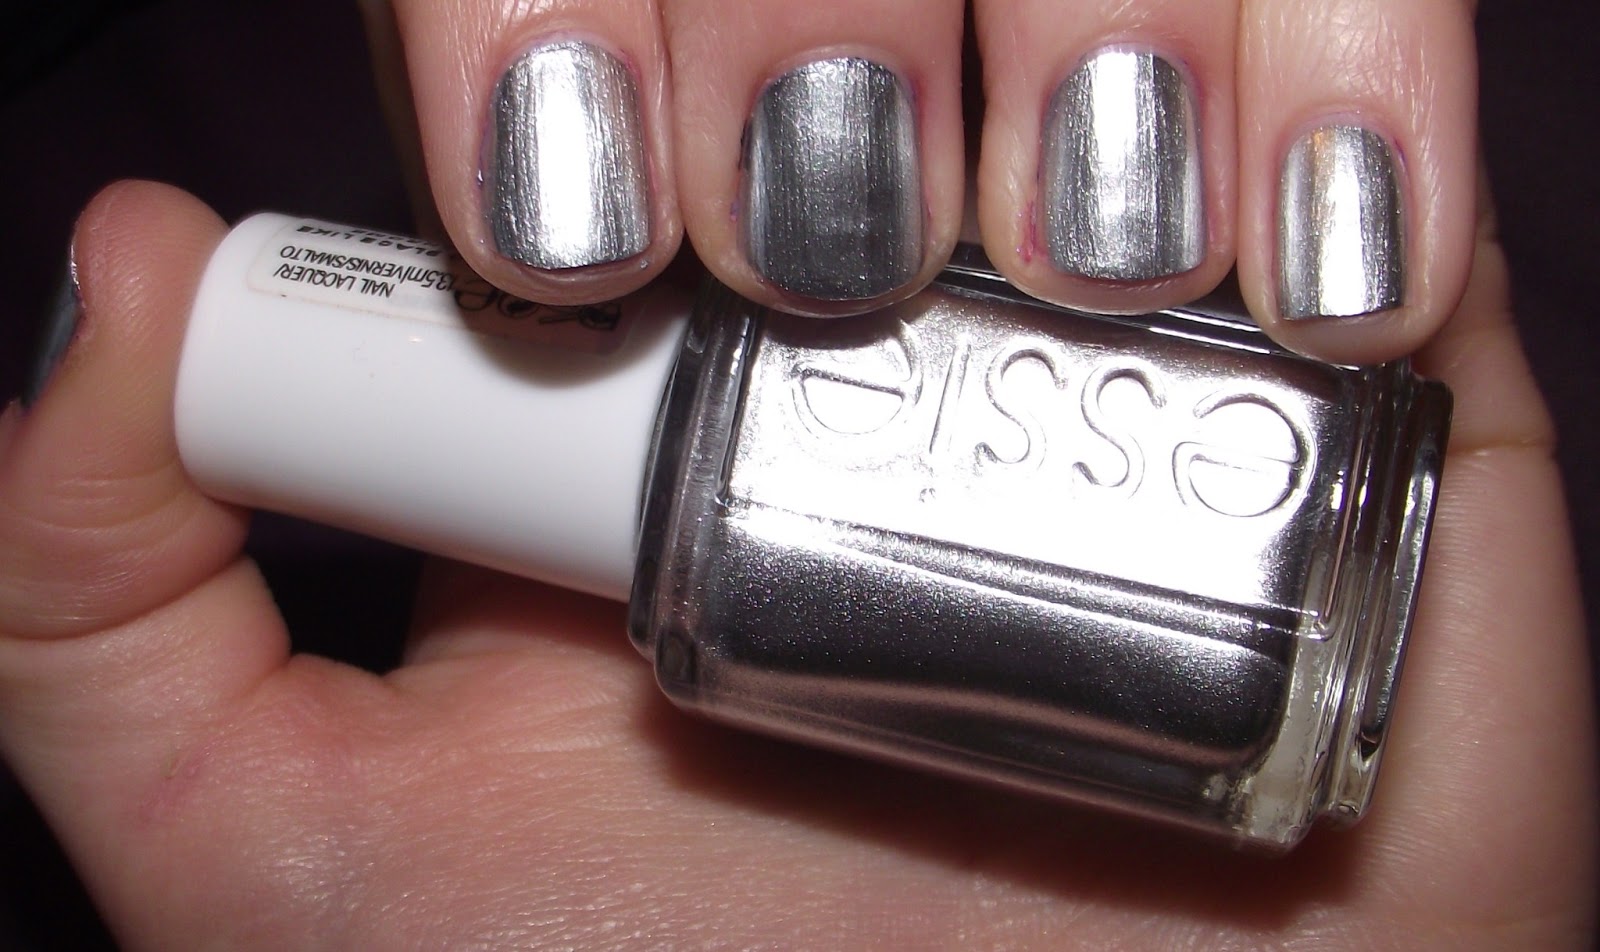 2. Essie Nail Polish in "No Place Like Chrome" - wide 2